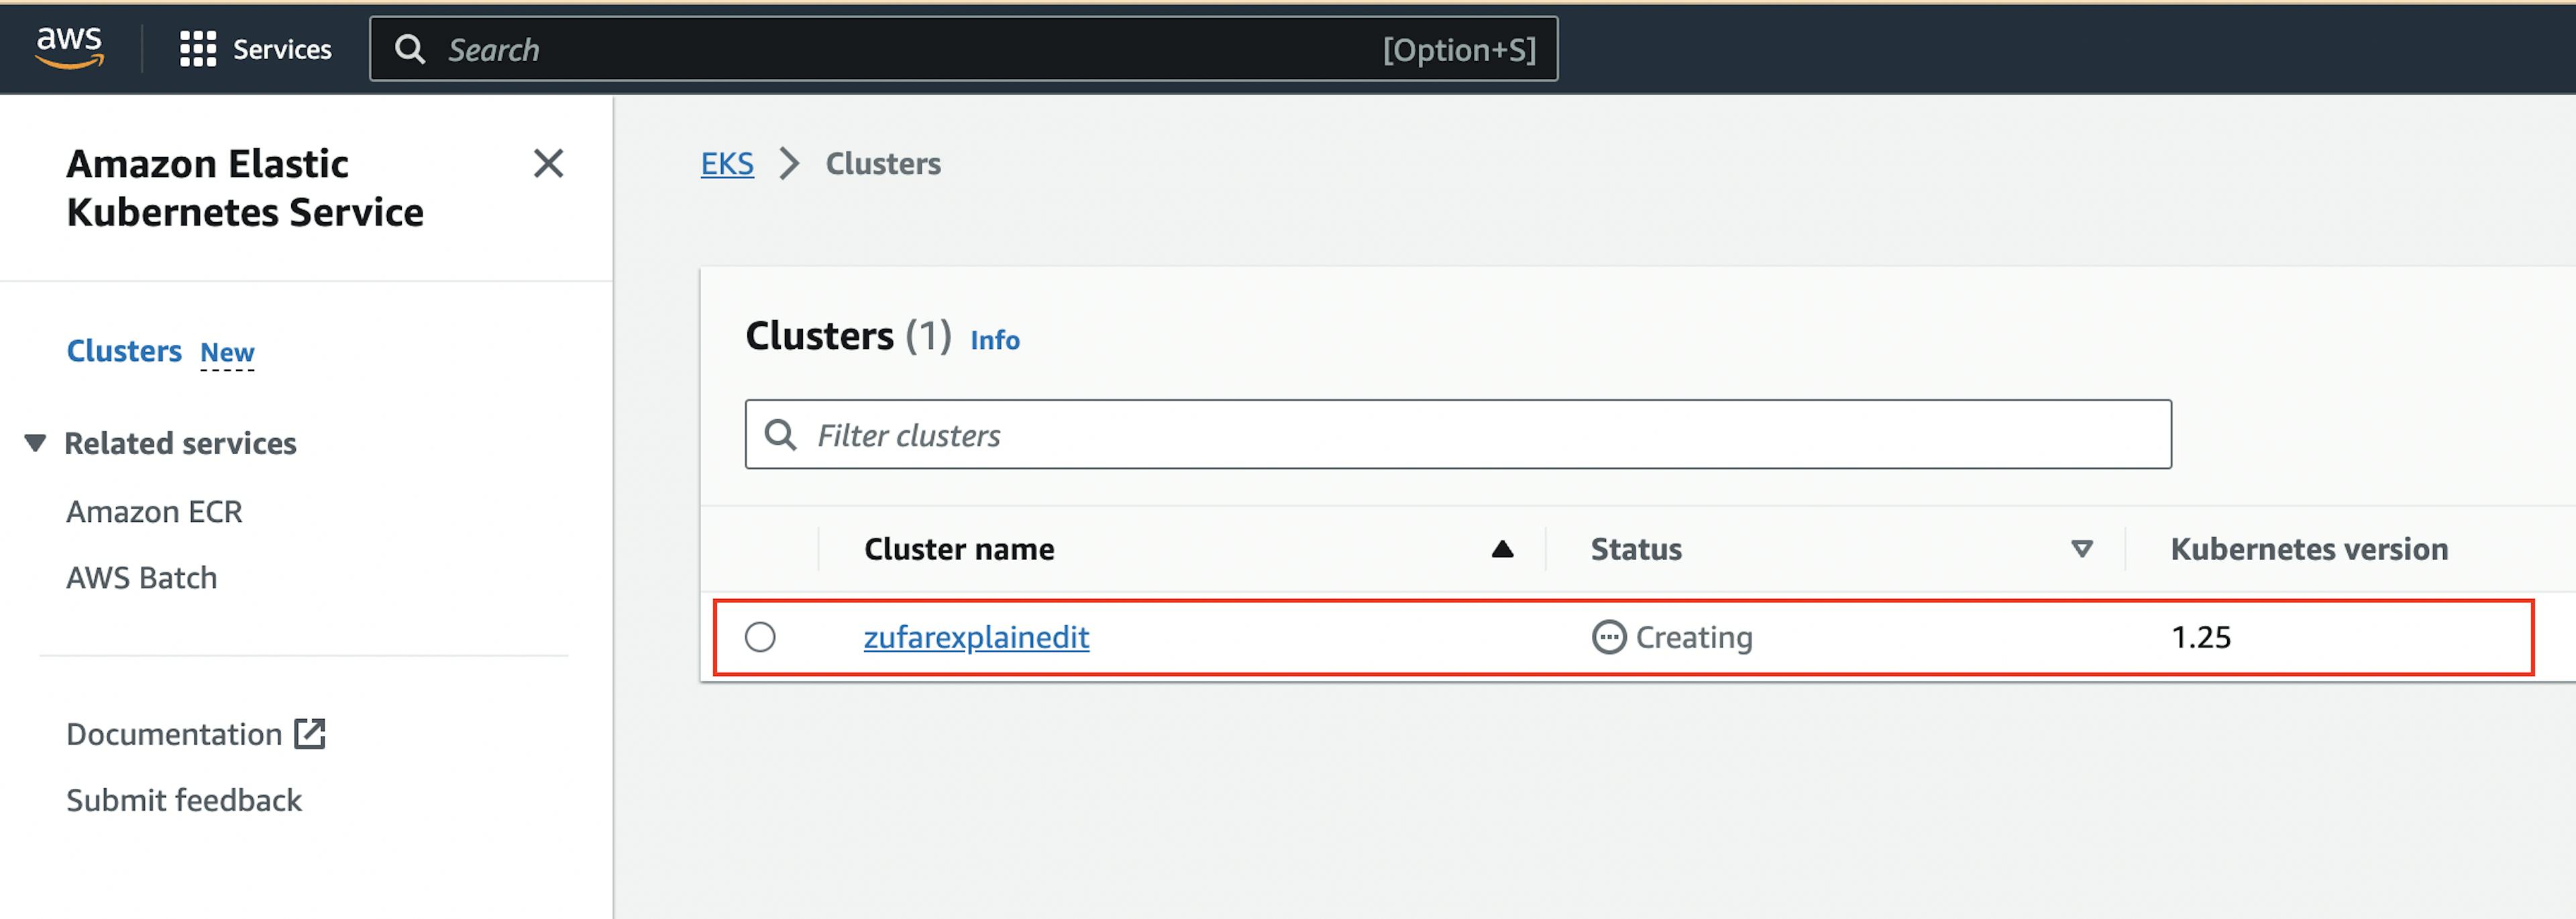 The screenshot of AWS web page with the pointer to AWS CloudFormation where you can see EKS cluster "creating" status